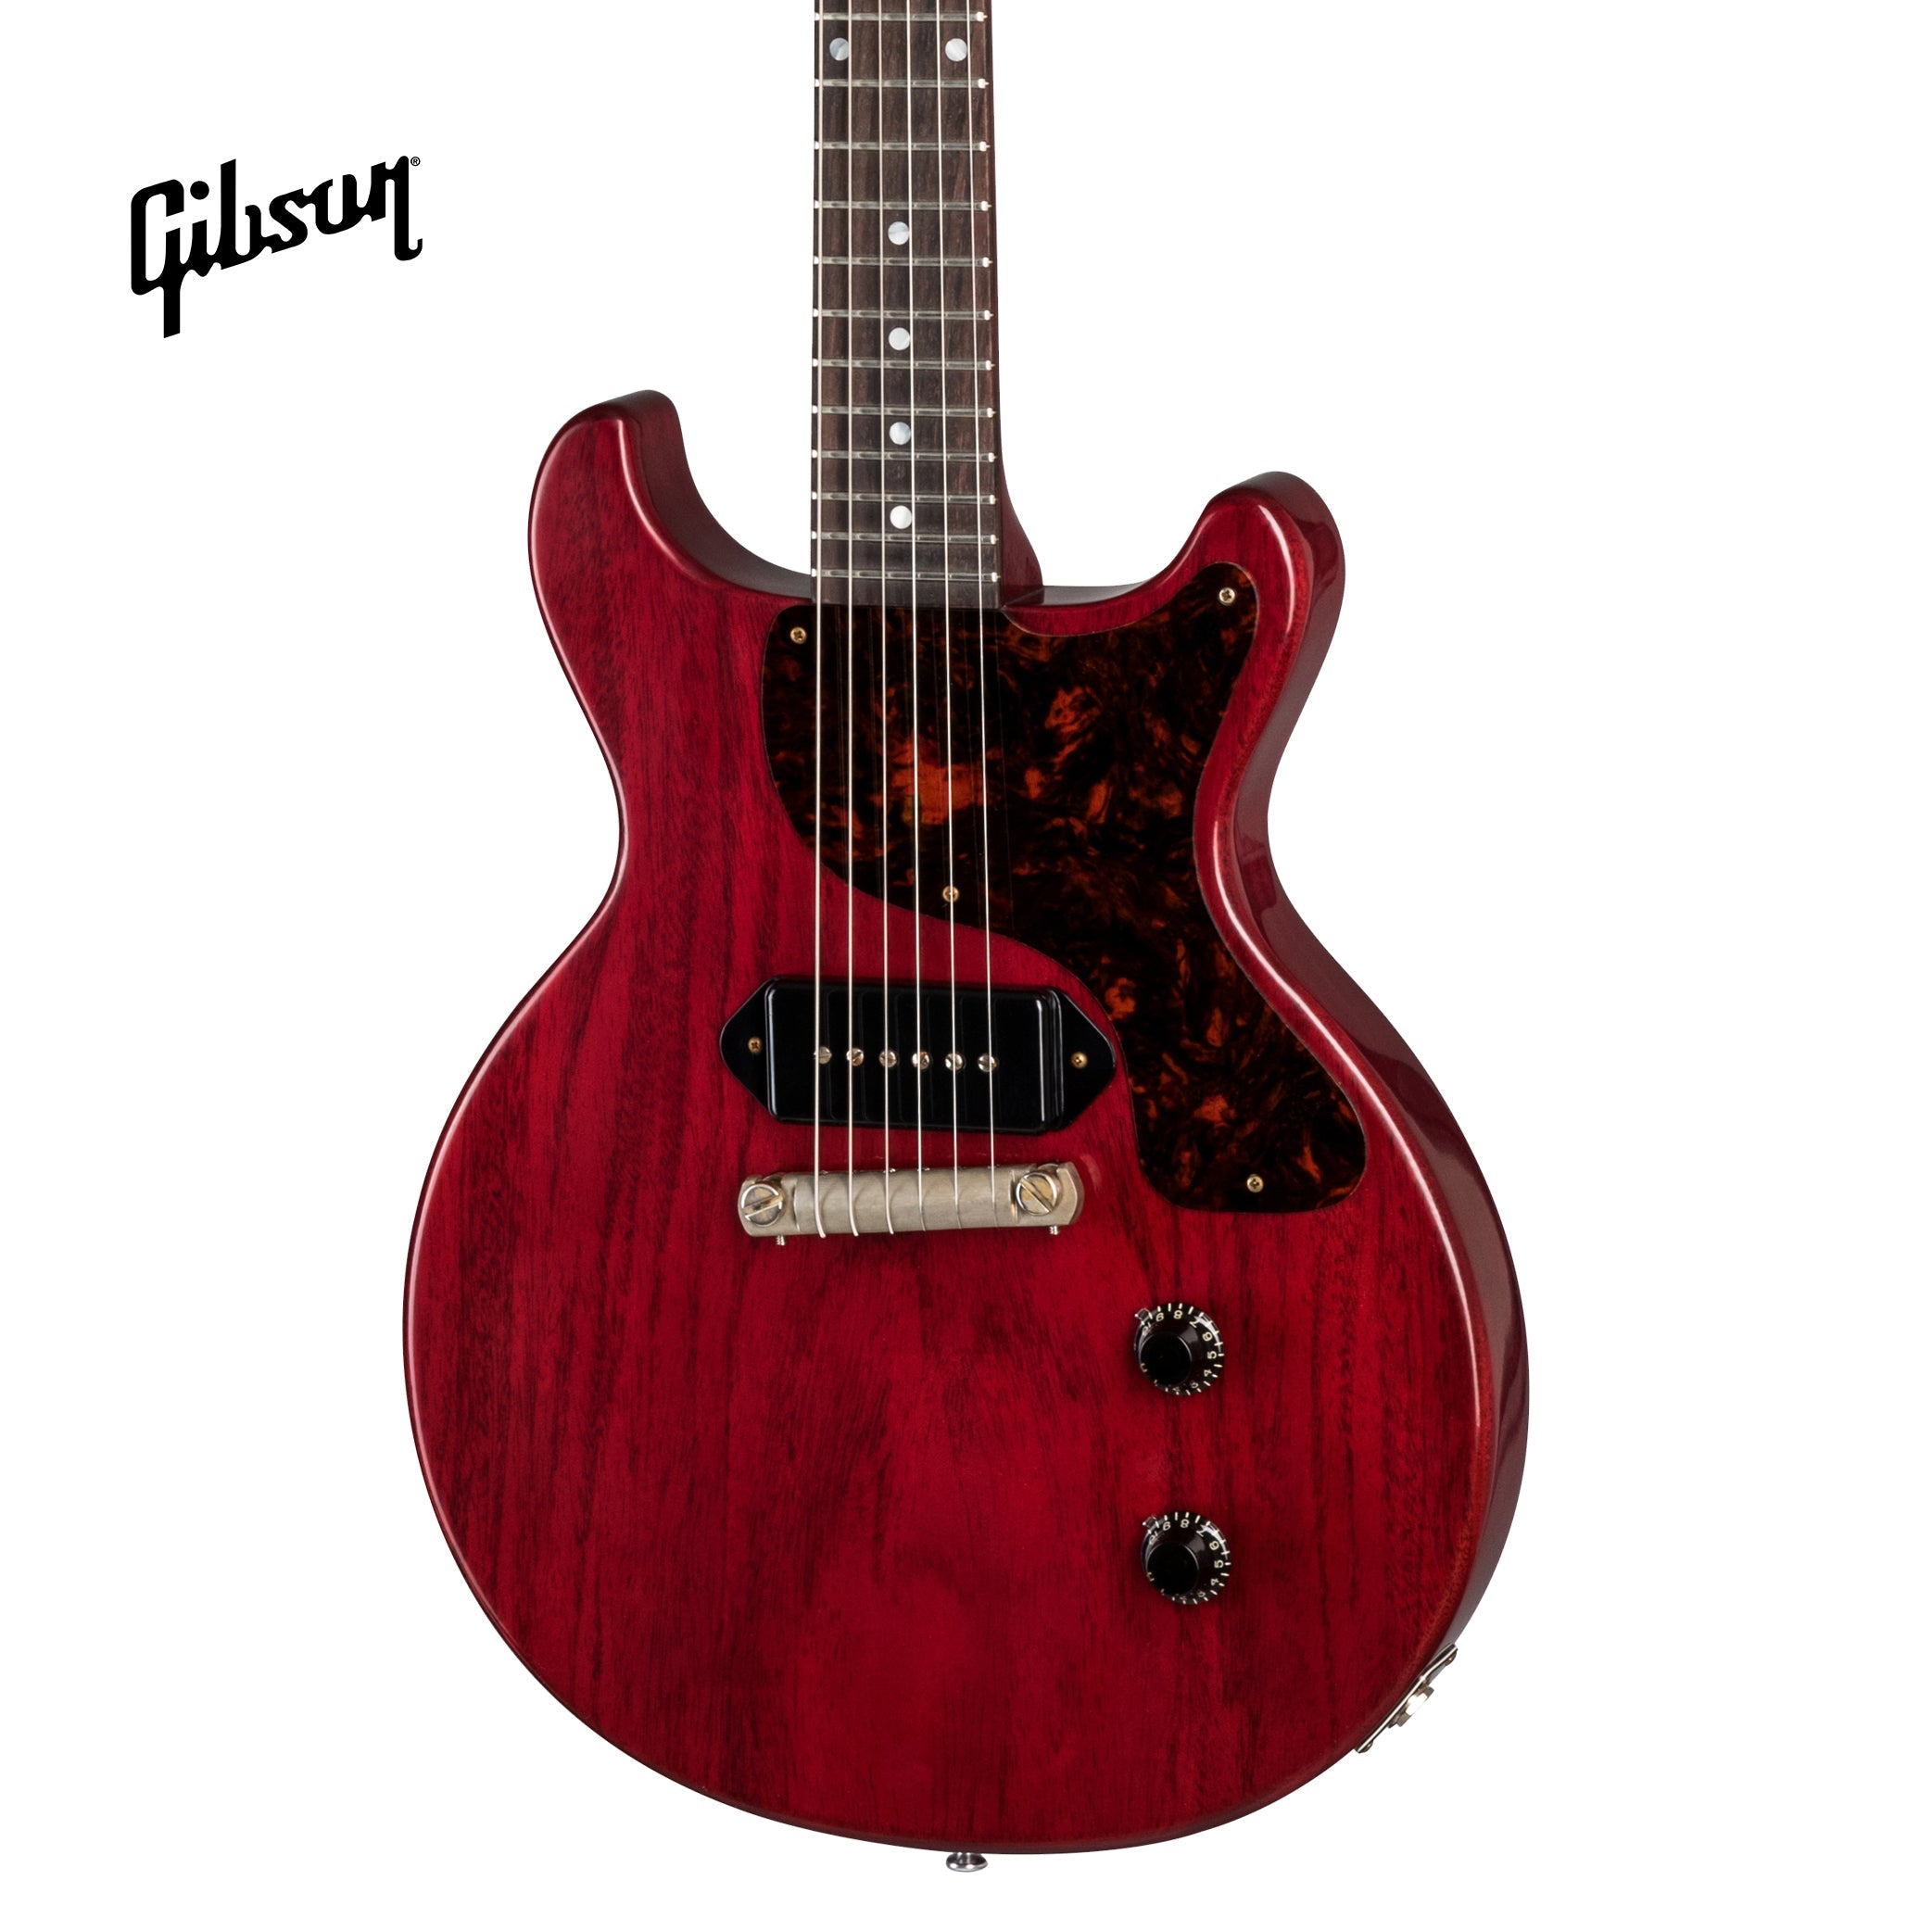 GIBSON 1958 LES PAUL JUNIOR DOUBLE CUT REISSUE VOS ELECTRIC GUITAR - CHERRY RED